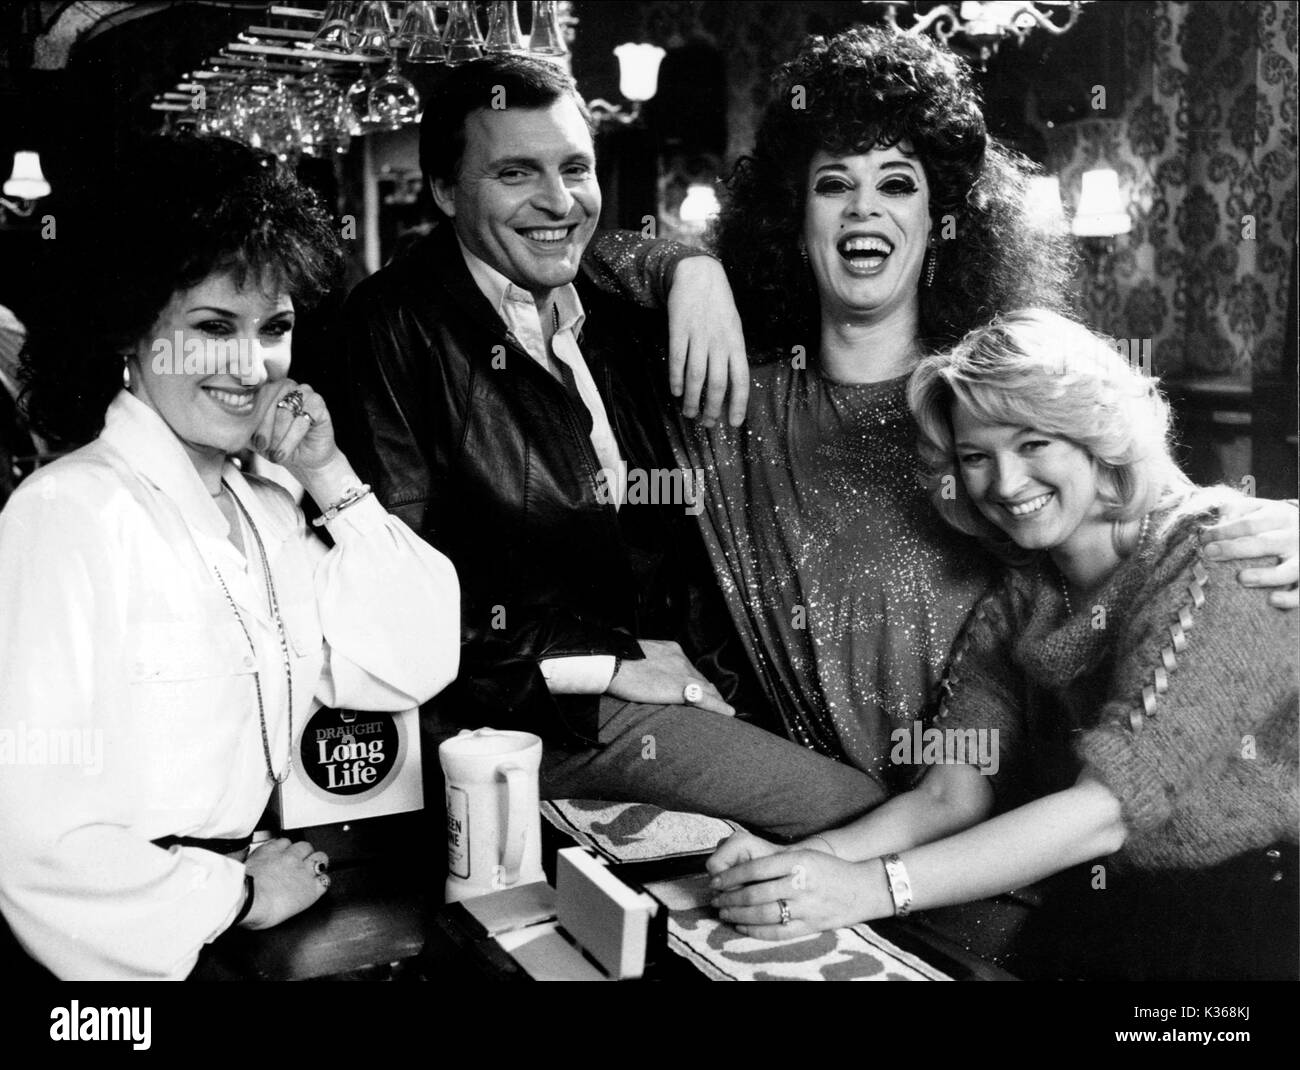 EASTENDERS ANITA DOBSON come Angie, PETER DEAN come Pete, David dale come John Fisher, GILLIAN TAYLFORTH come Kathy Foto Stock